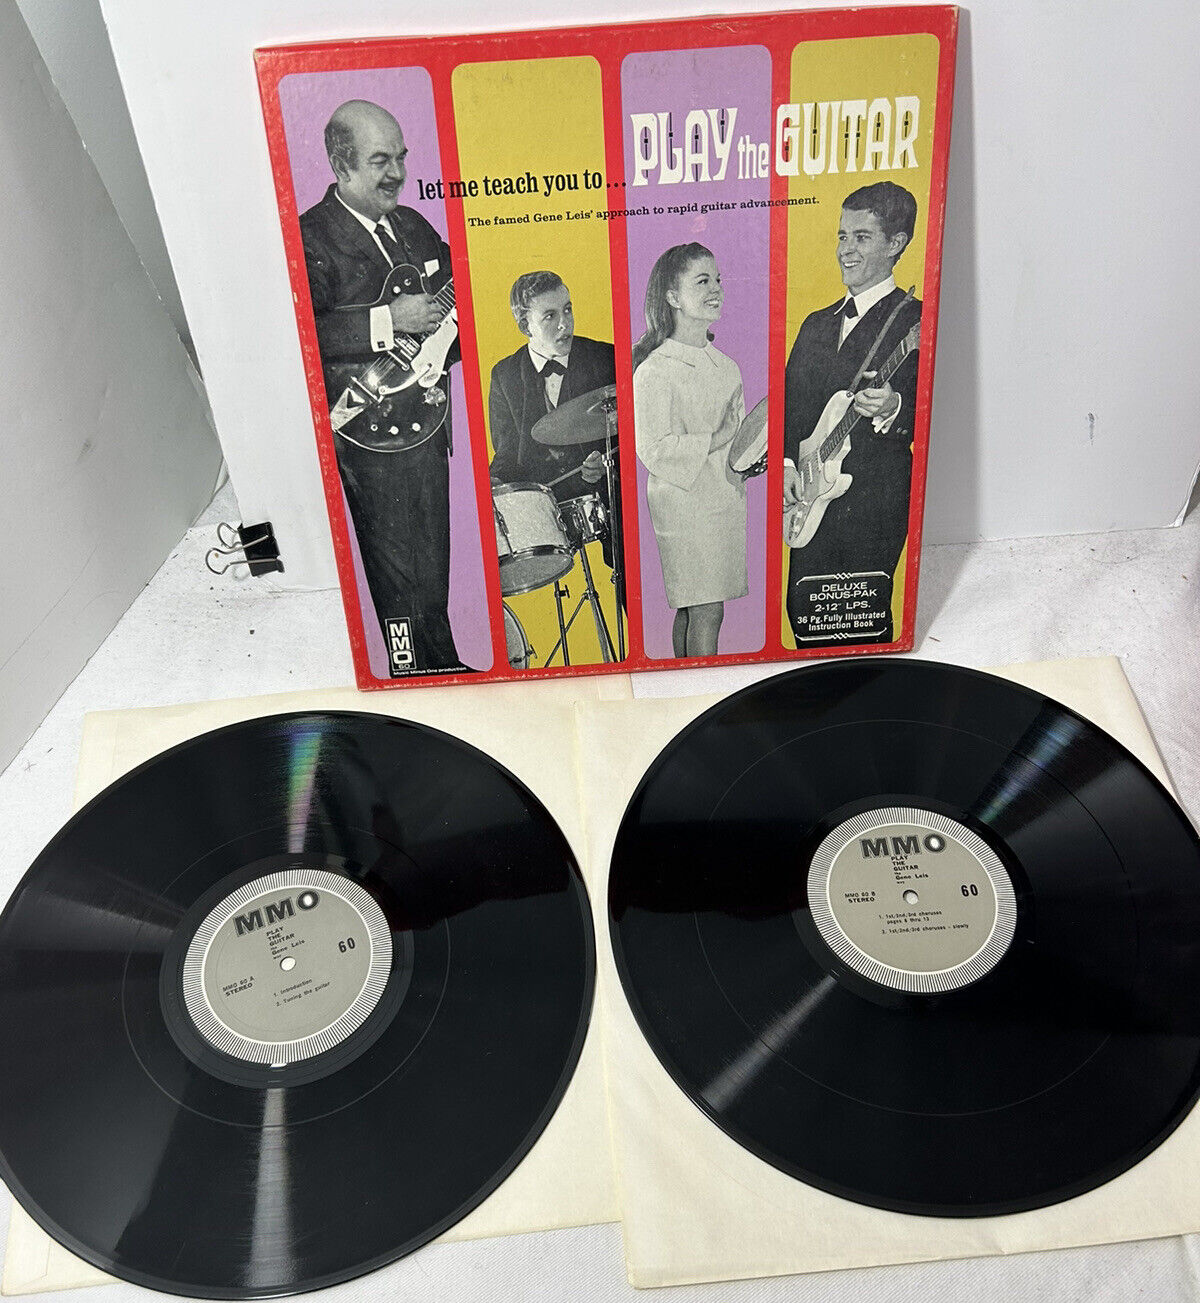 Let Me Teach You to Play The Guitar the Gene Leis MMO 60 2 LP  box set